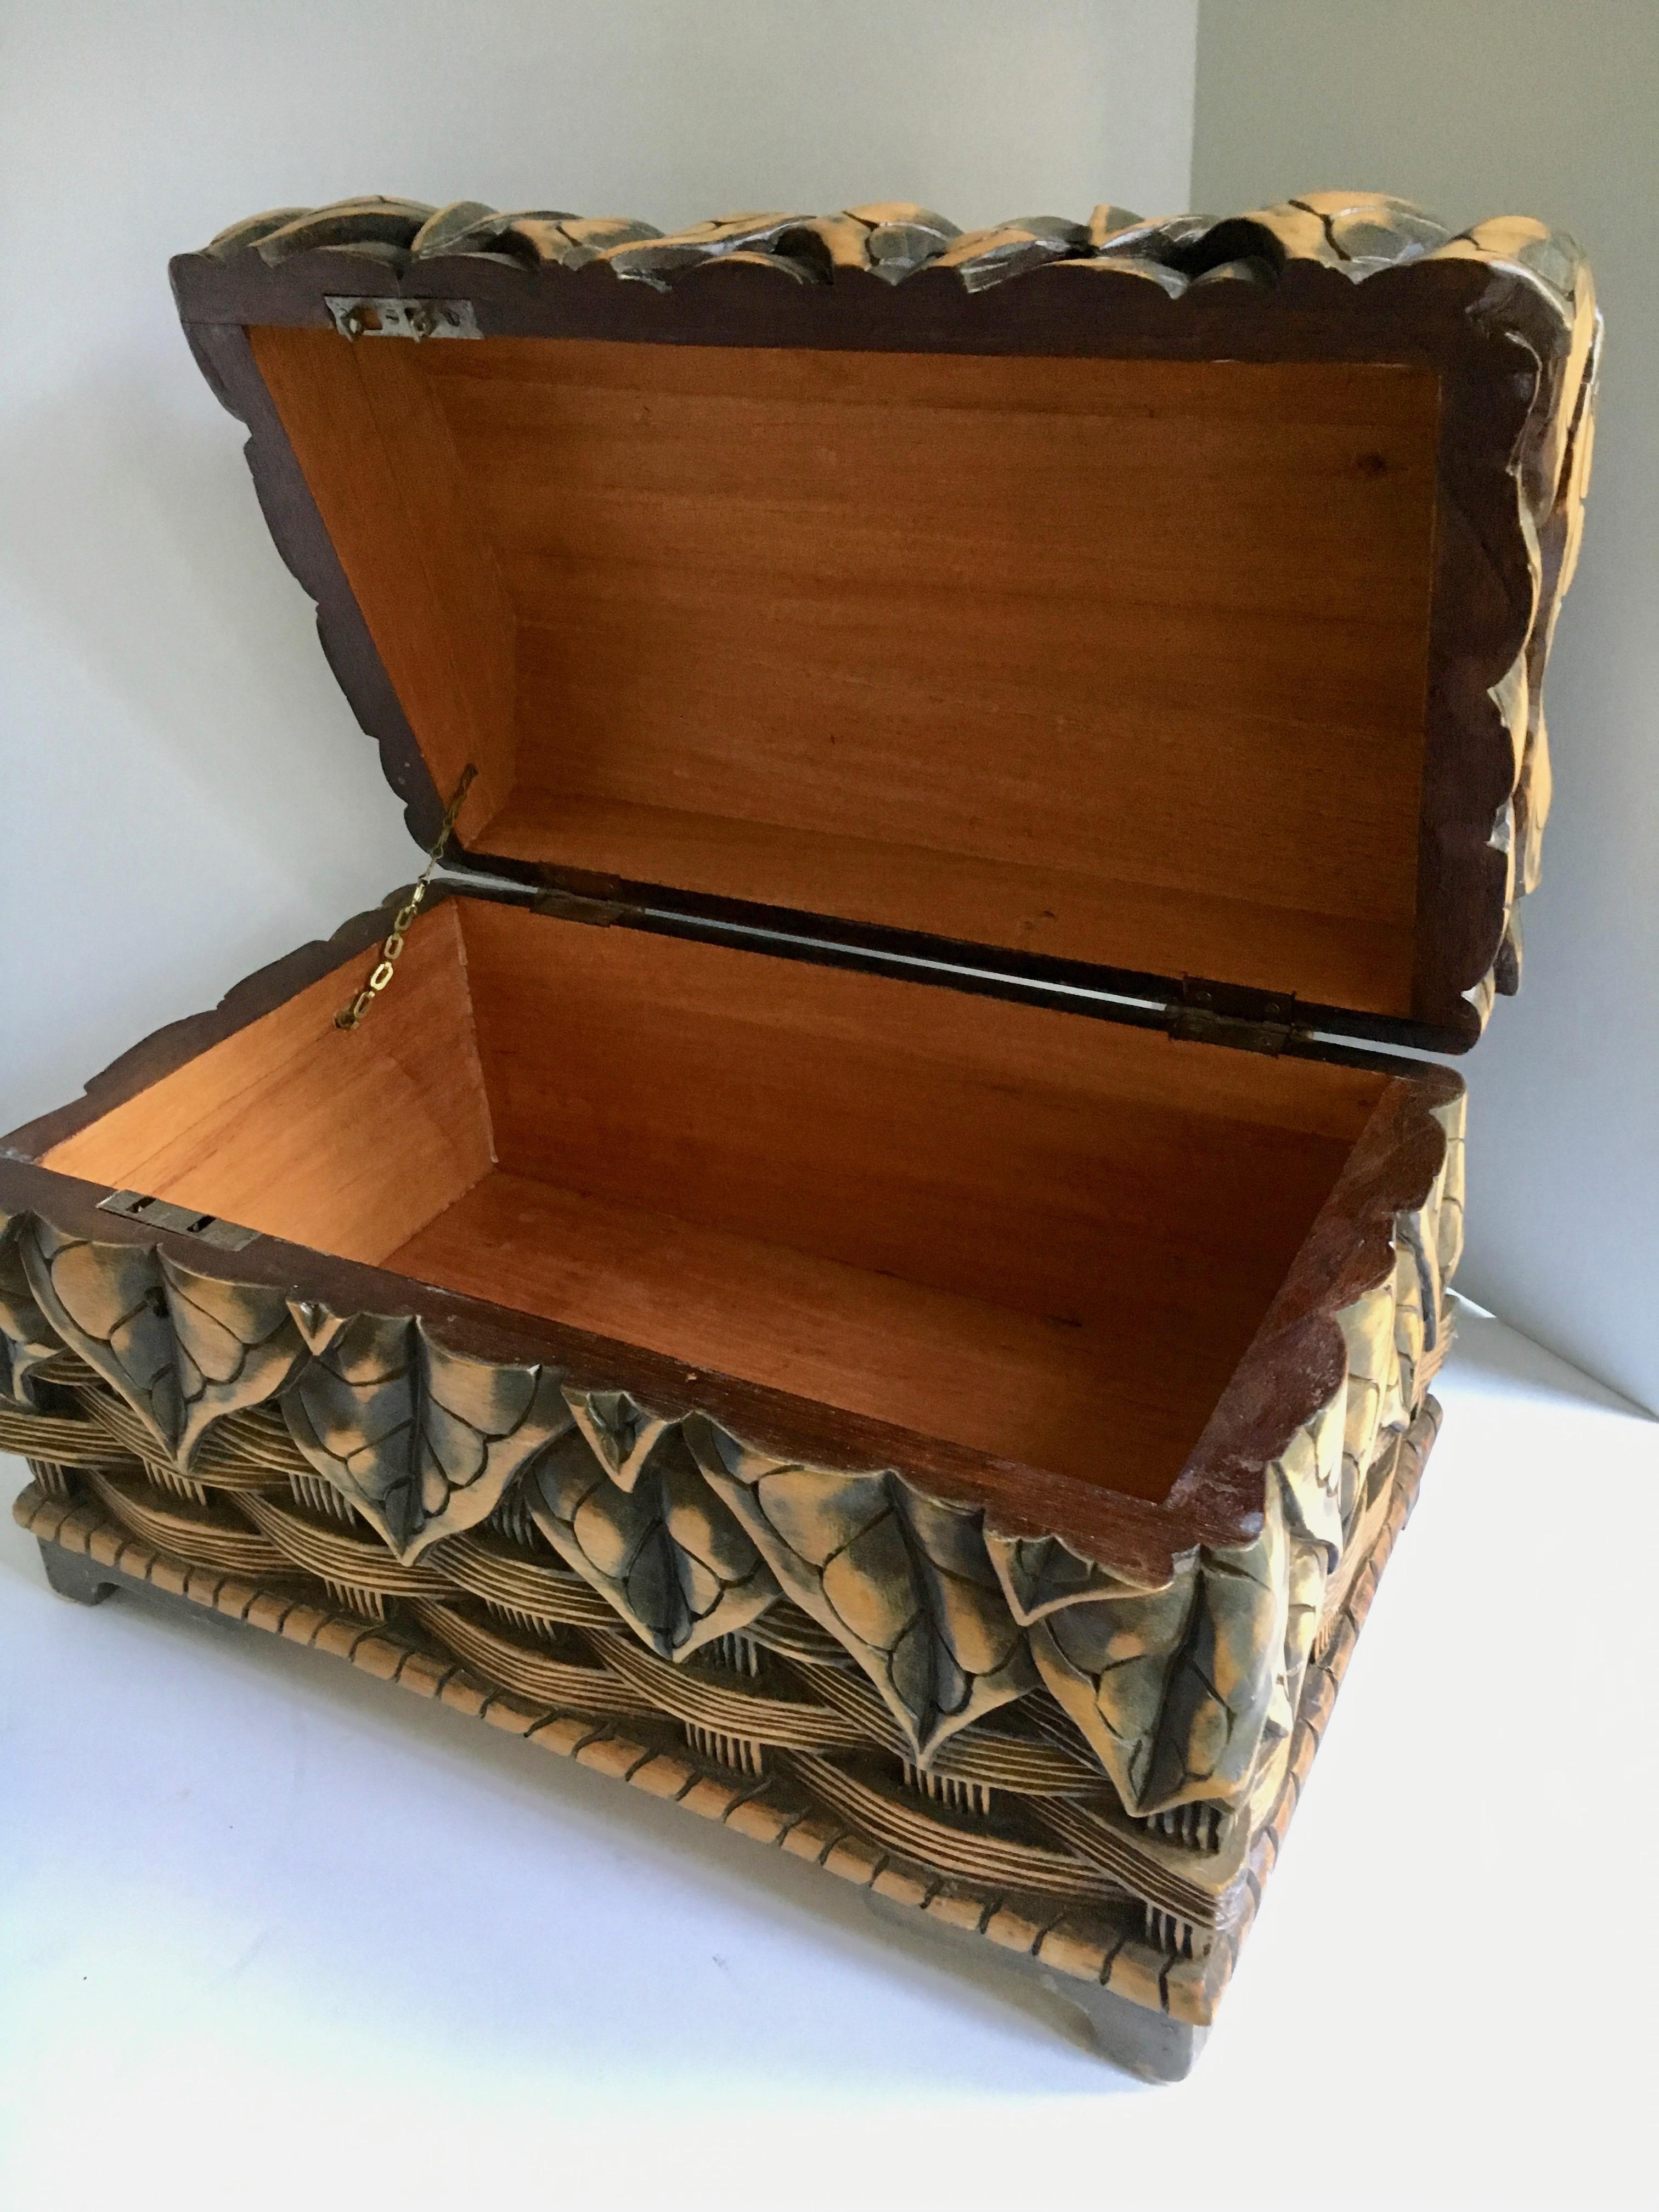 Folk Art Hand-Carved Box with Floral Detailing